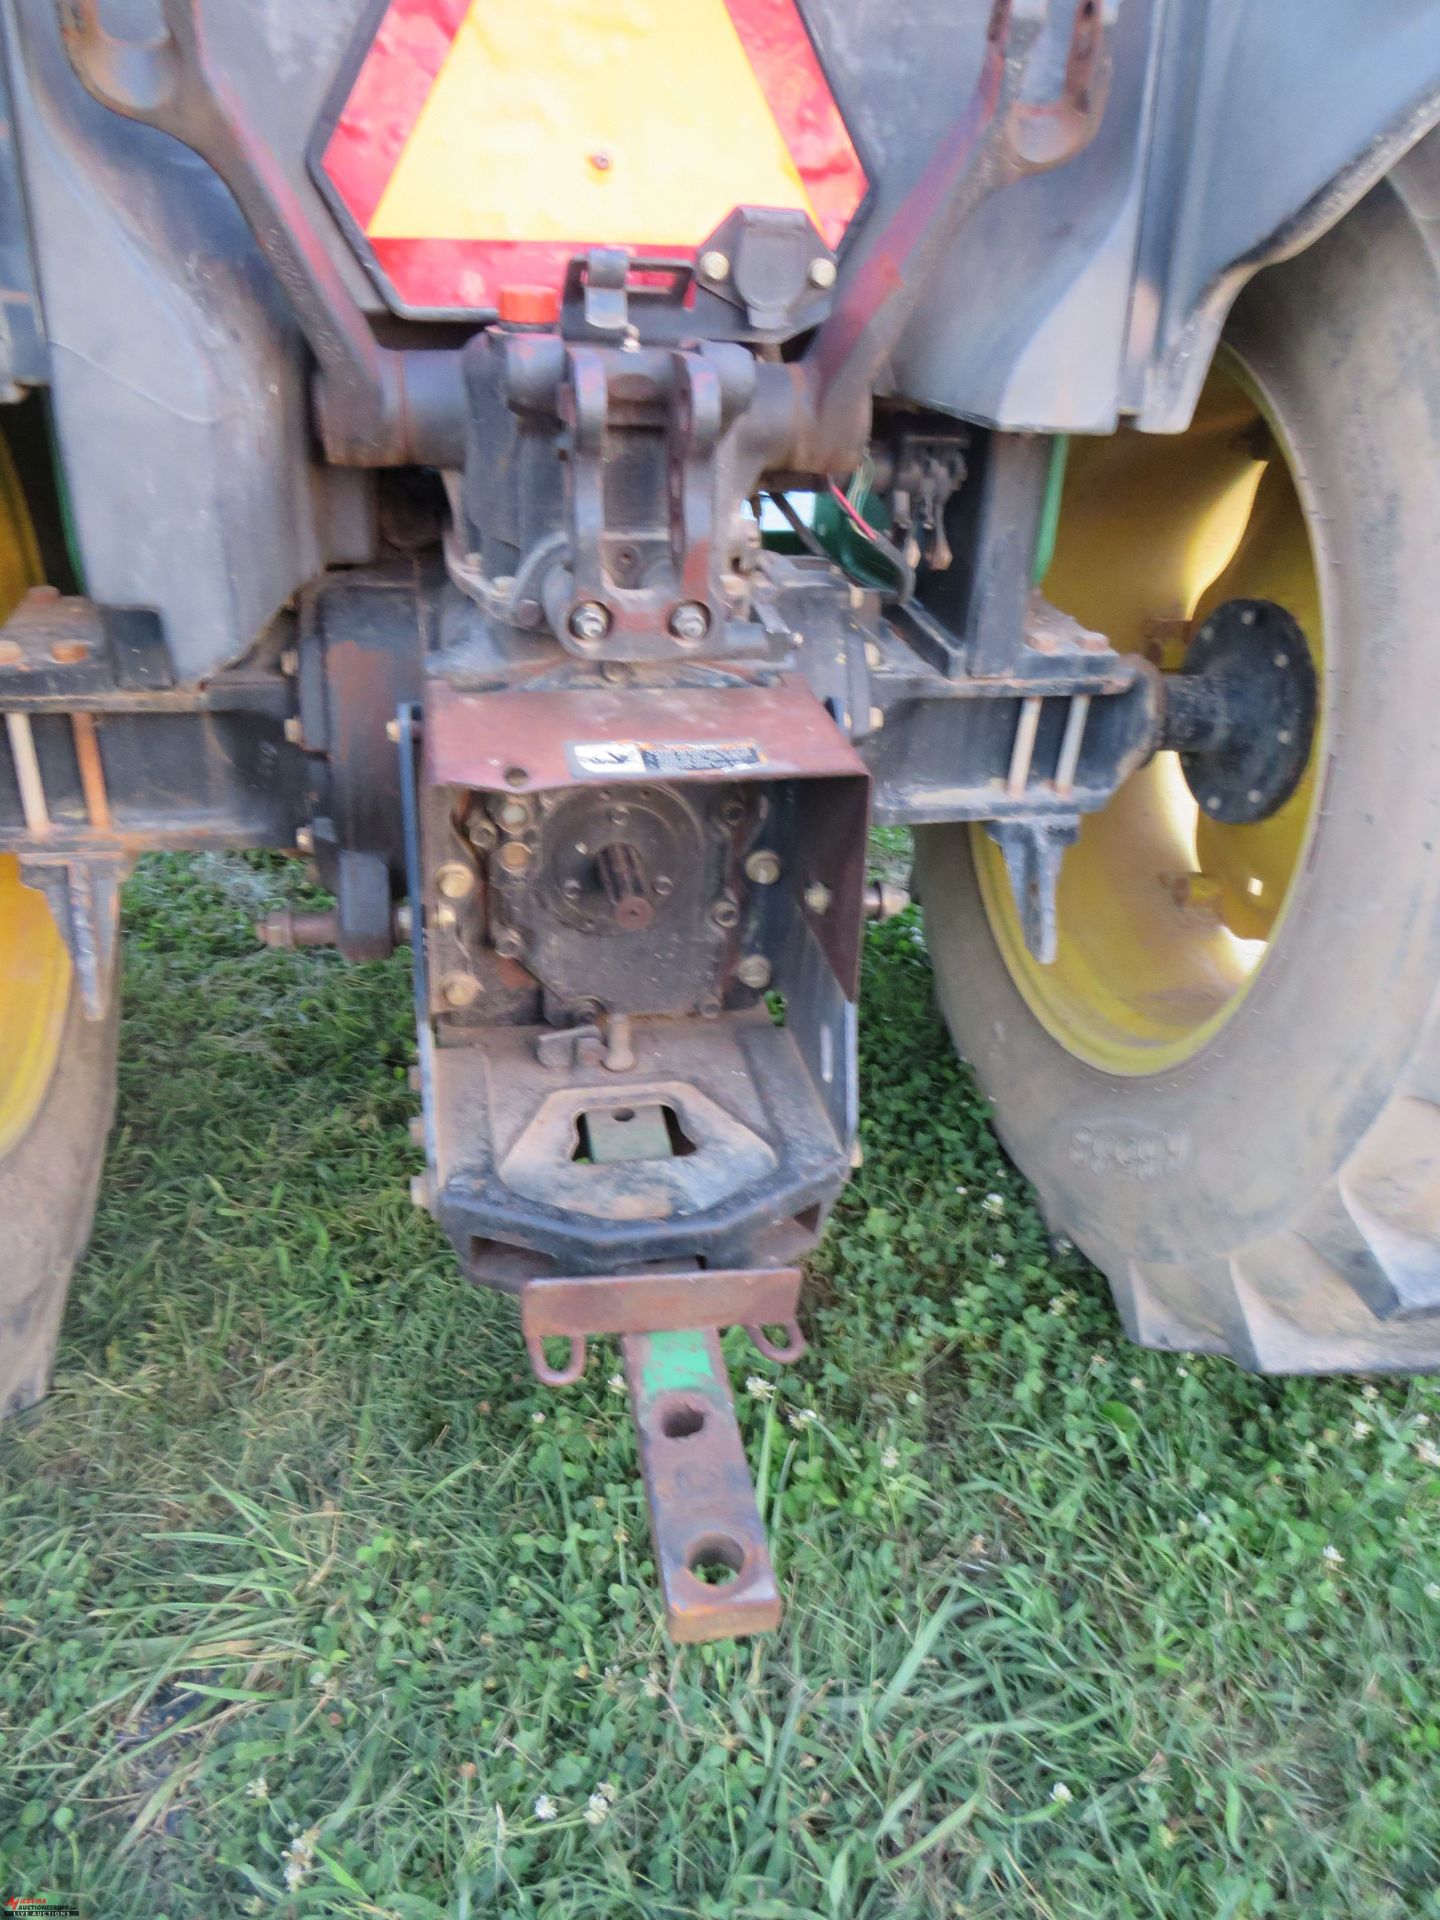 2004 JOHN DEERE 5105 TRACTOR, PTO, 16.9-28 REAR TIRES, 4178 HOURS SHOWING (HOURS SUBJECT TO CHANGE), - Image 5 of 7